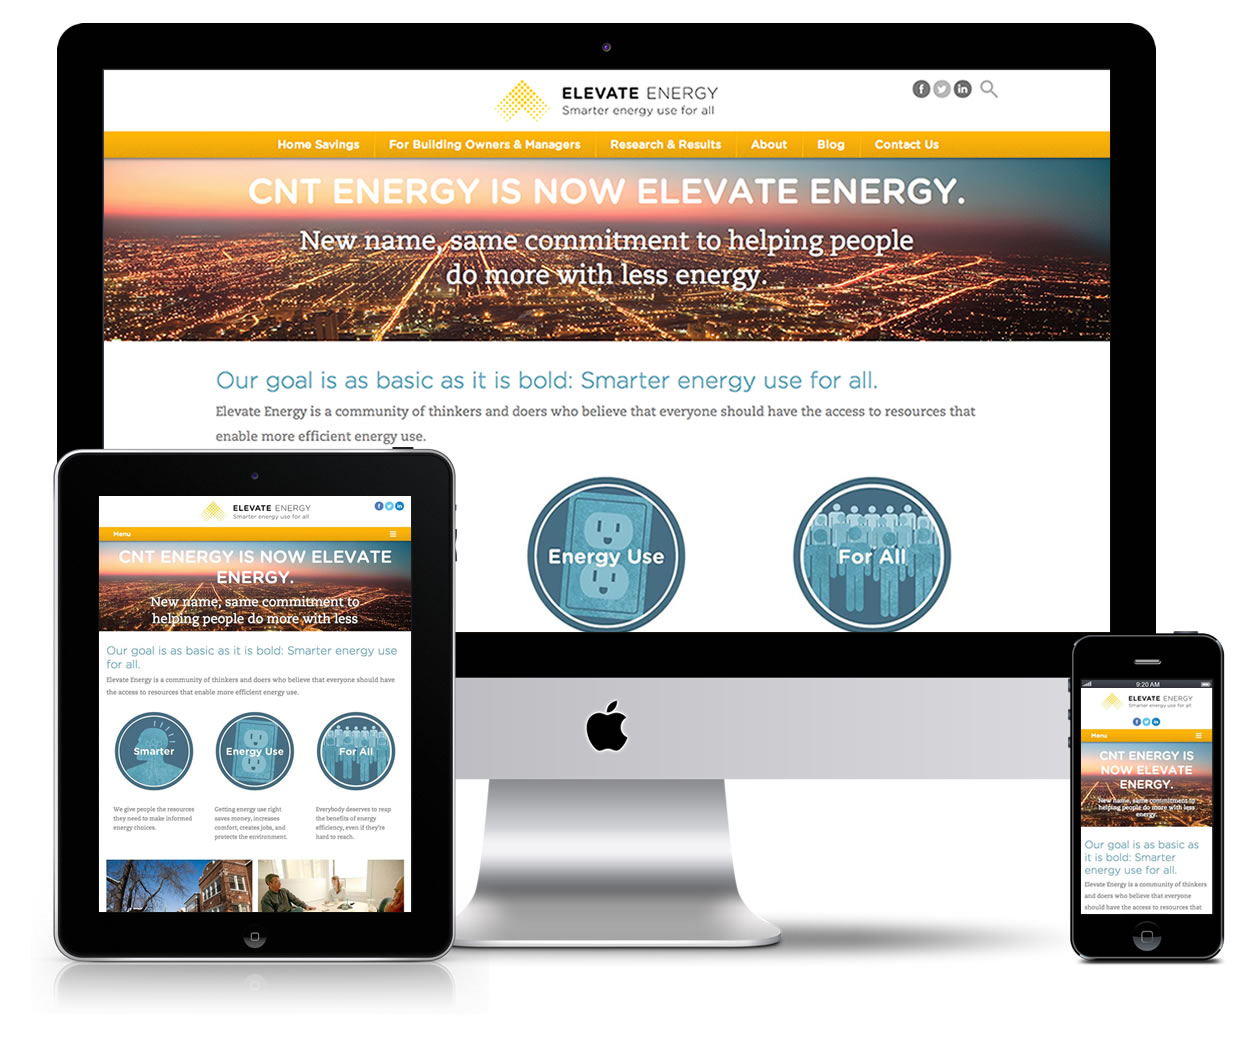 Elevate Energy's website features responsive design, which gives customers a beautiful and intuitive experience, no matter whether they're browsing on a mobile device, tablet or desktop.